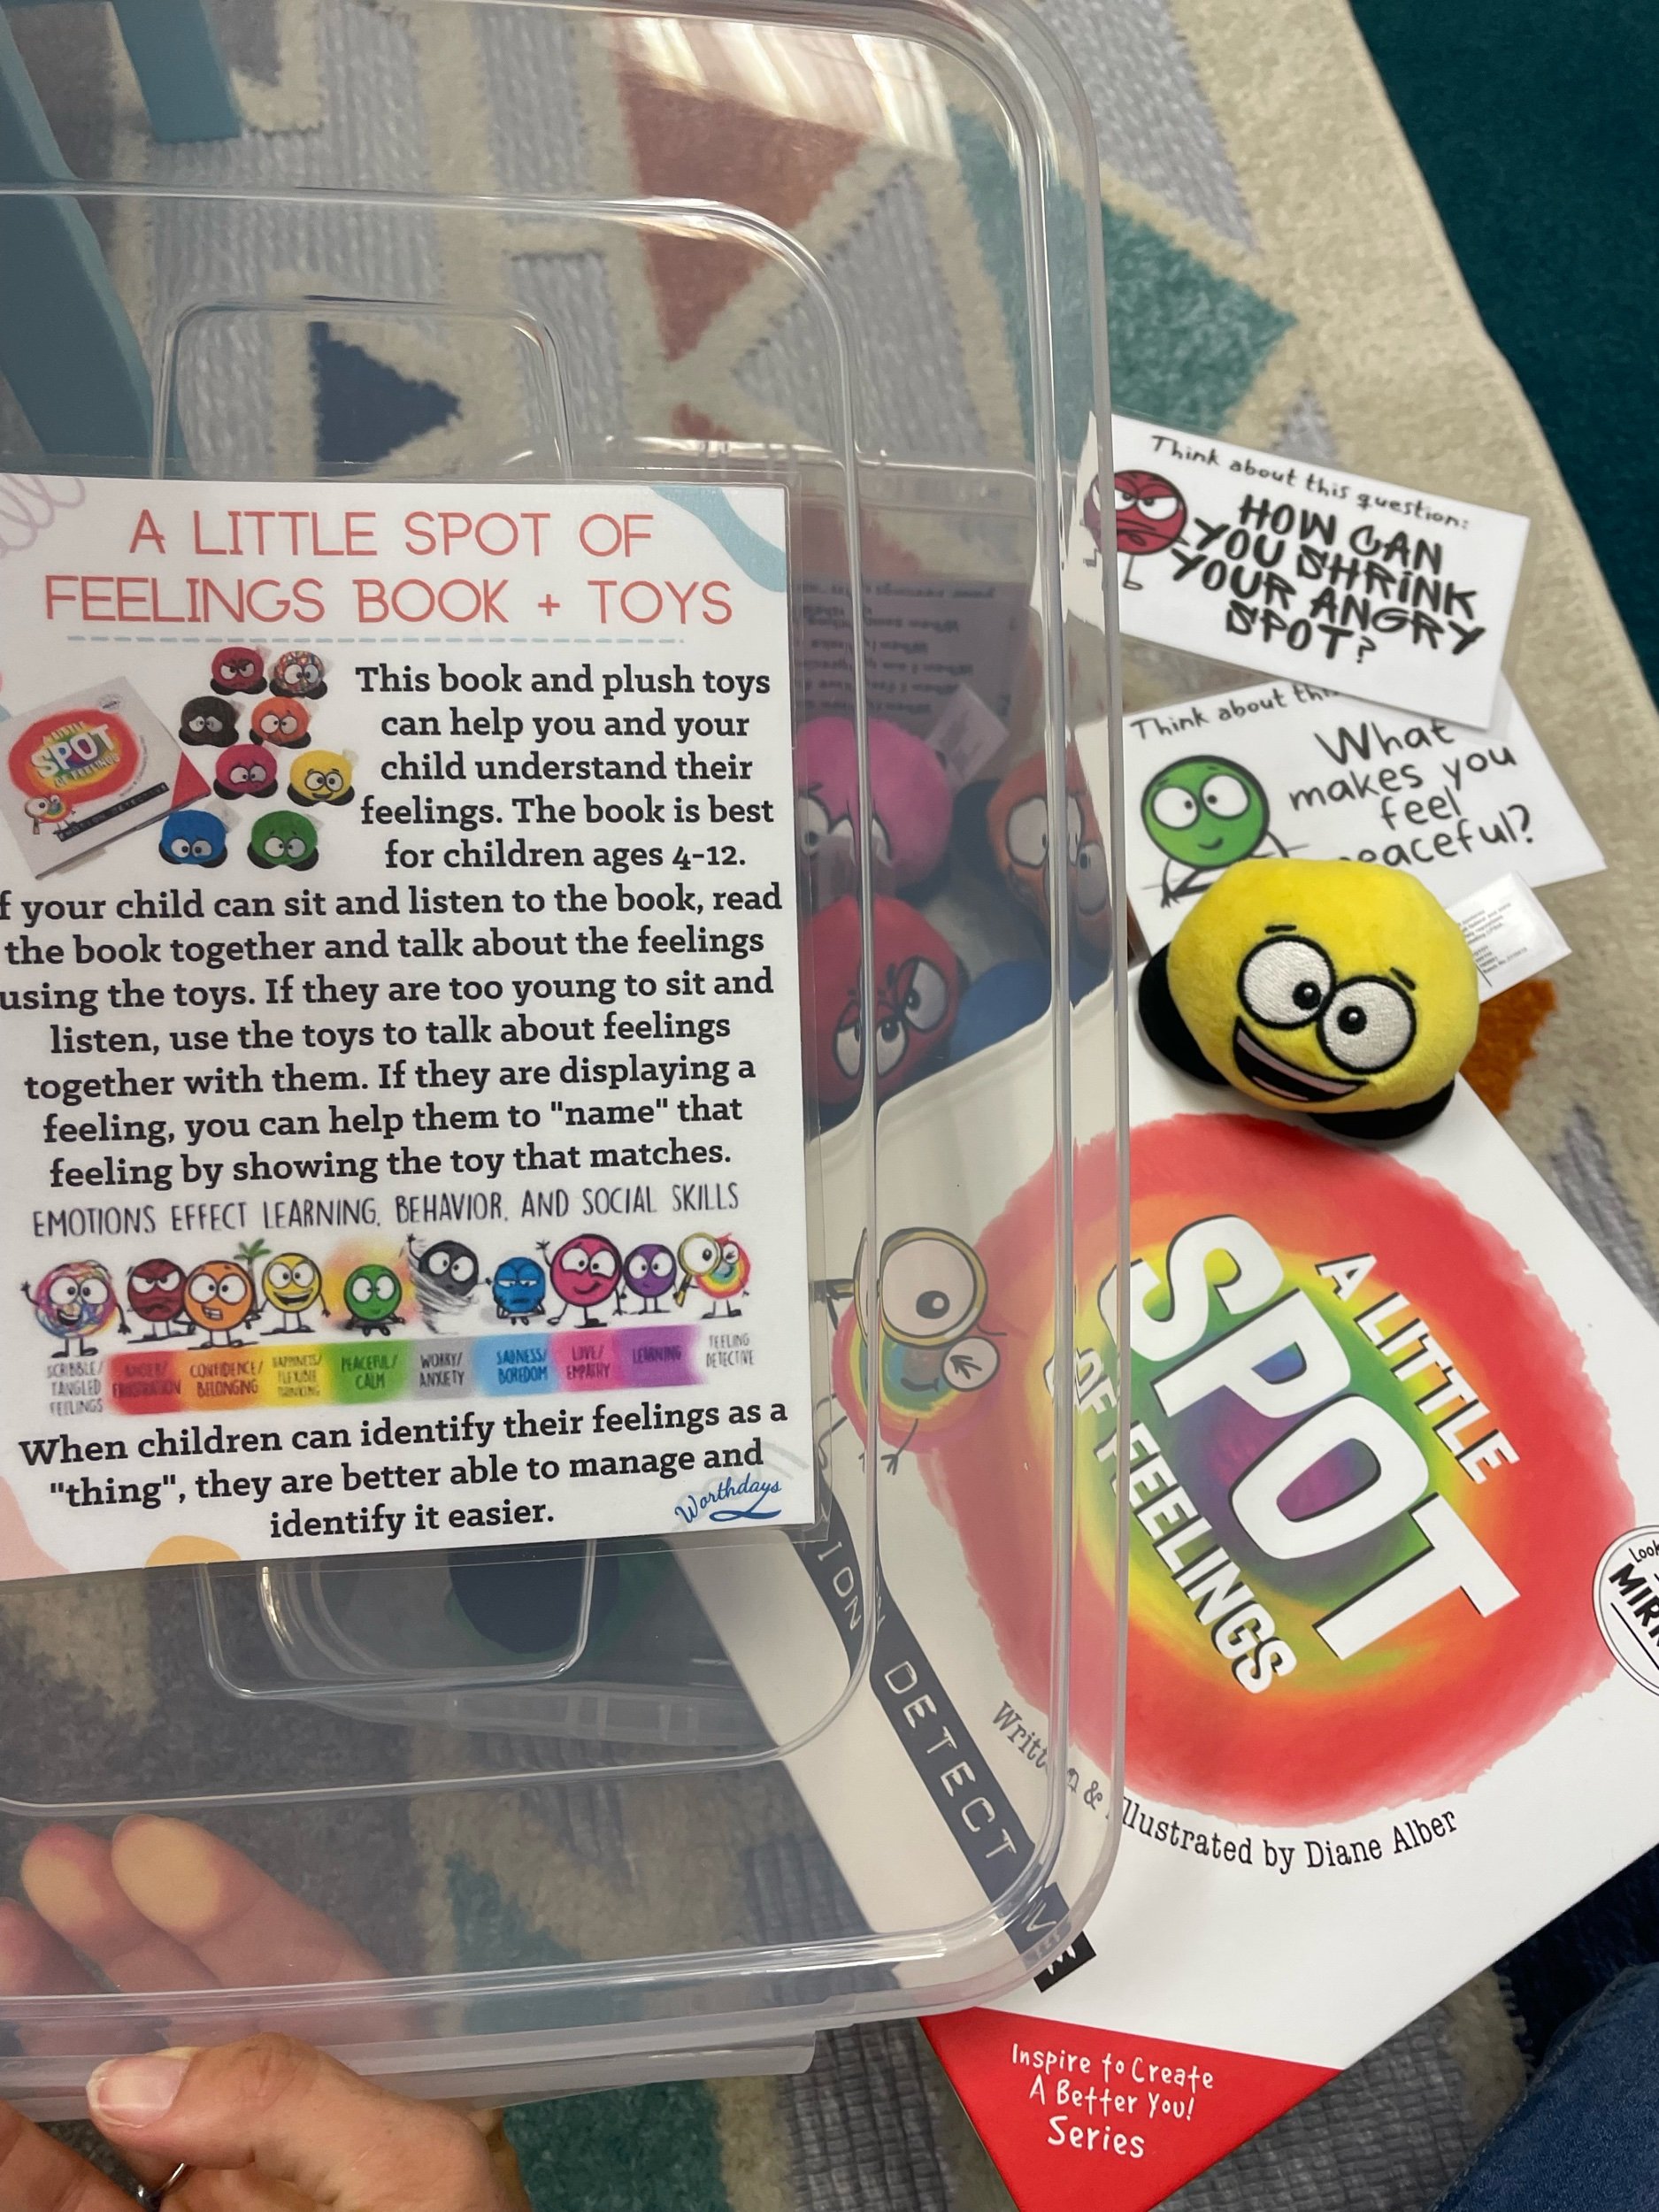  We created custom information cards for each activity included in the room. For this box, we included additional cards to supplement the book. One social worker immediately saw the individual, organized boxes and said that they were perfect for her 